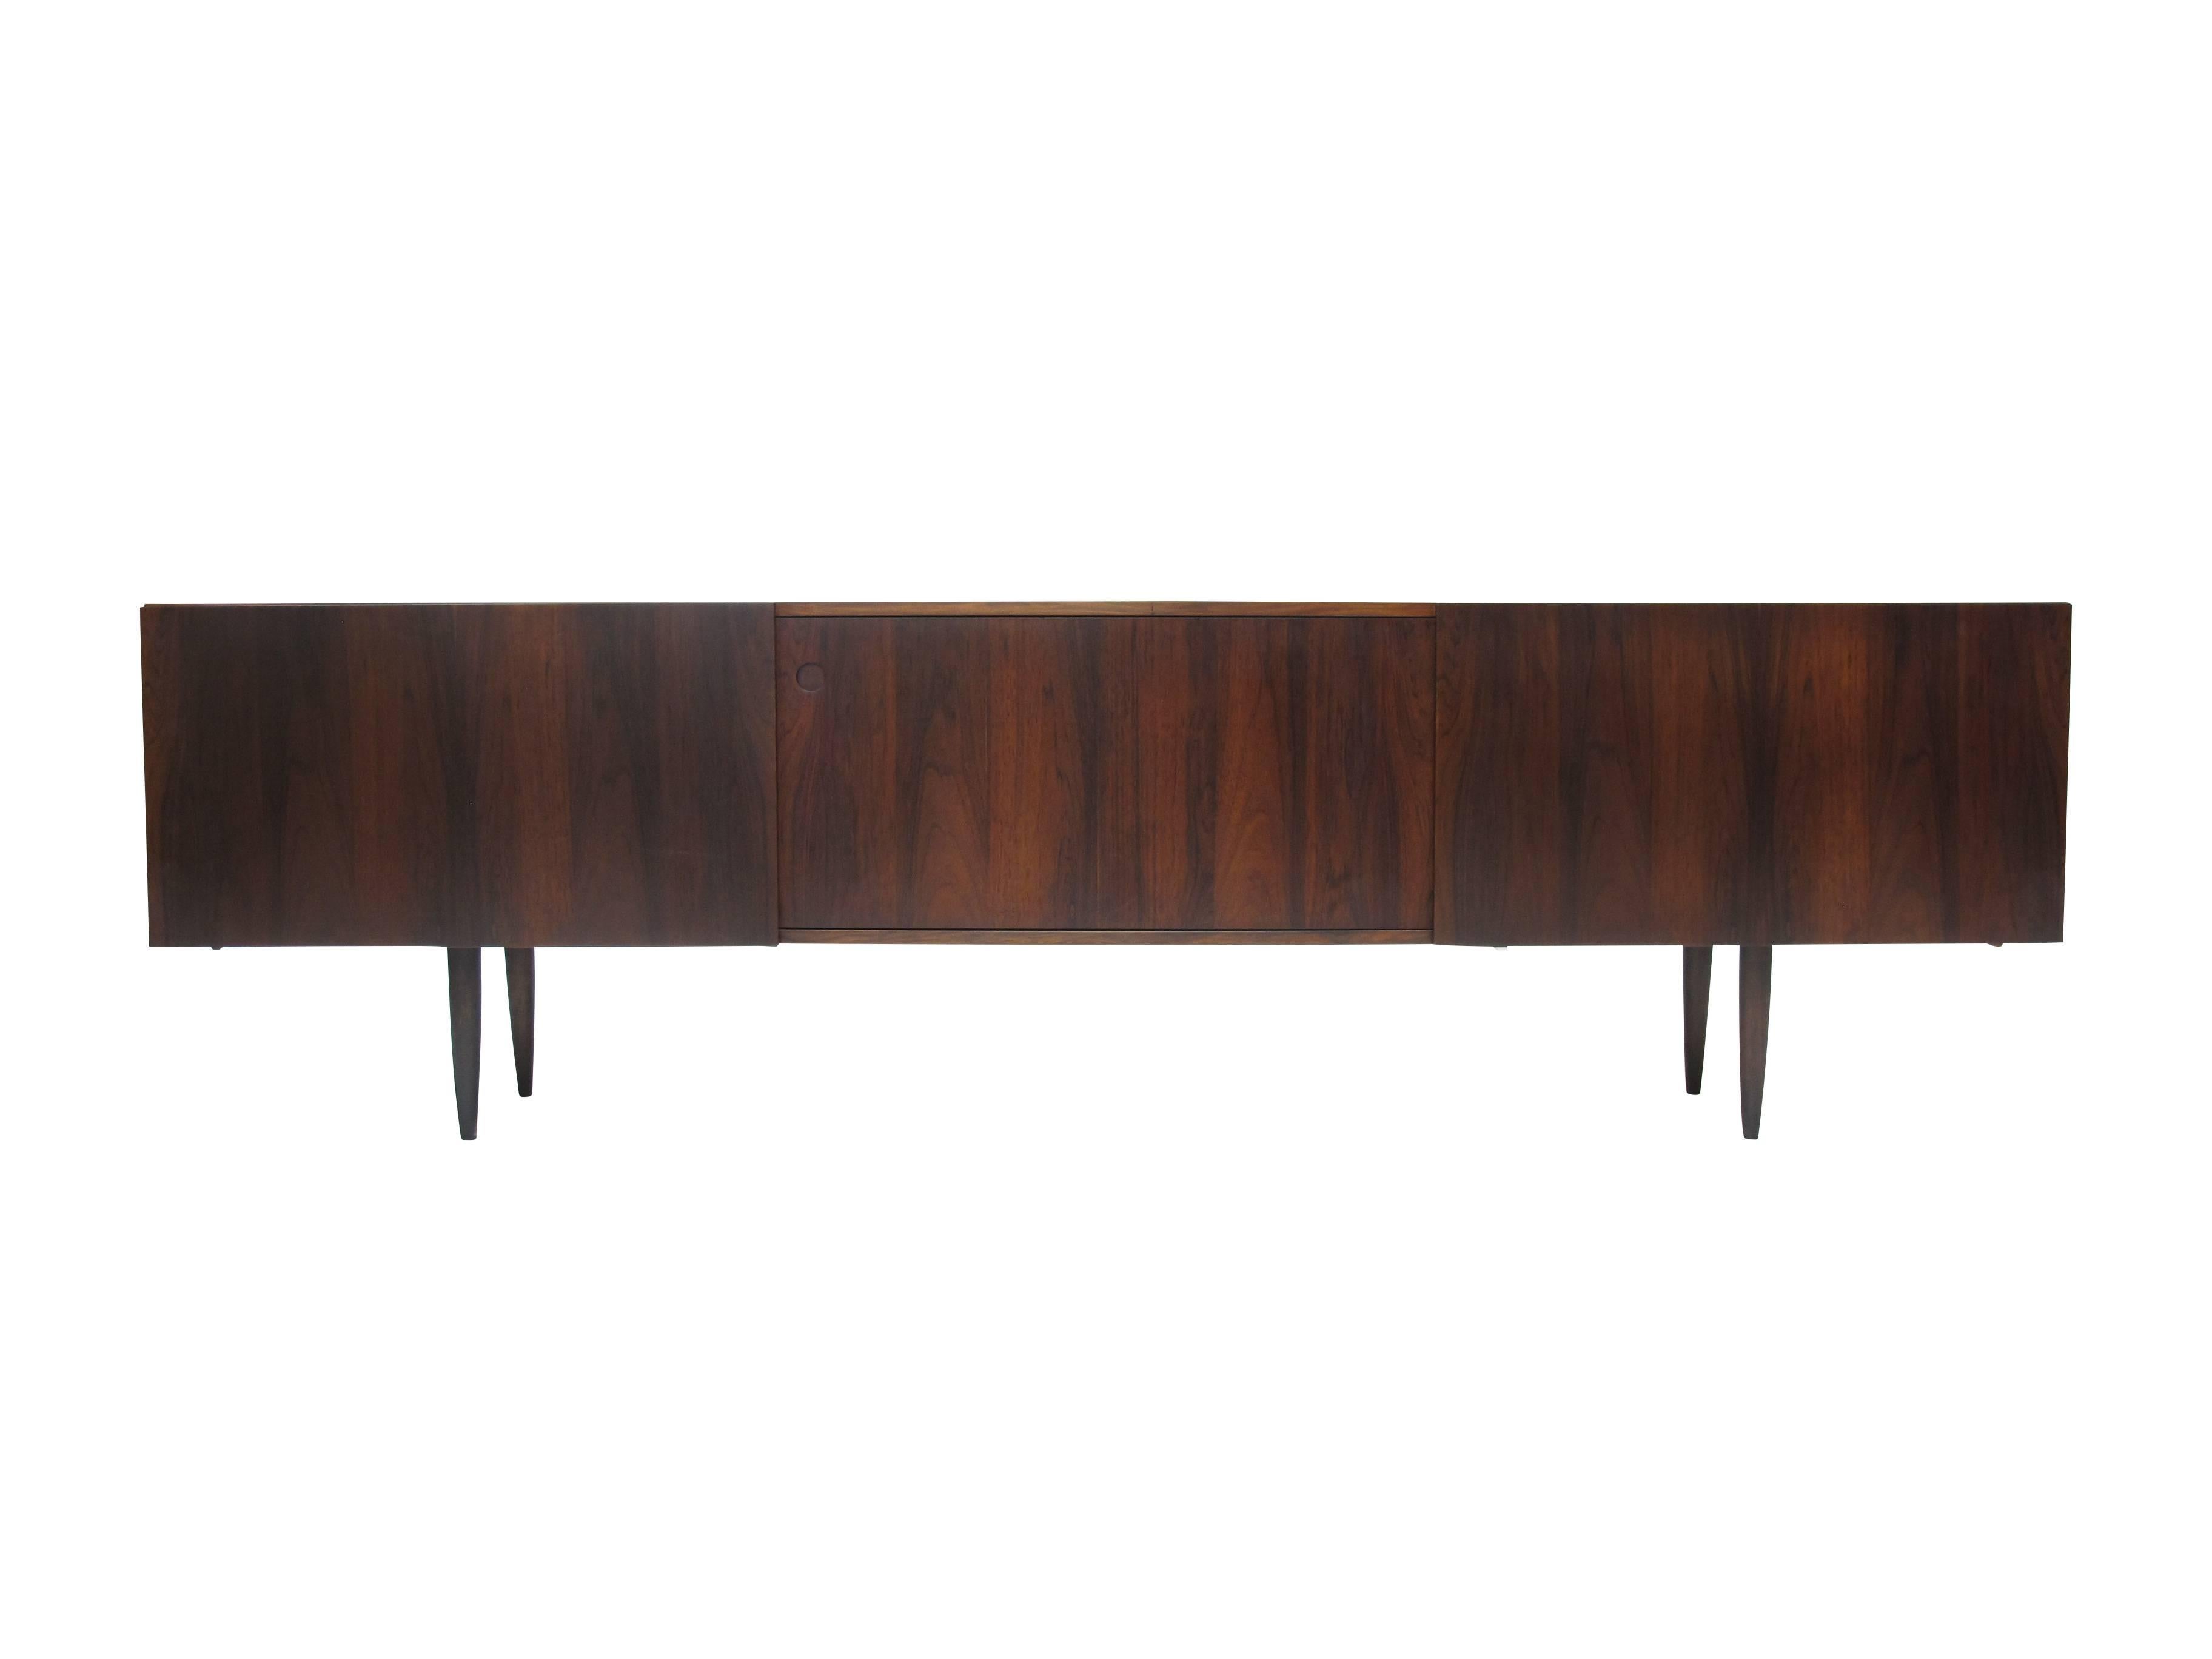 Brazilian rosewood credenza designed by Ib Kofod Larsen. Minimalist Danish design features three sliding doors raised on tapered legs. White oak interior with adjustable shelves and two drawers center. 